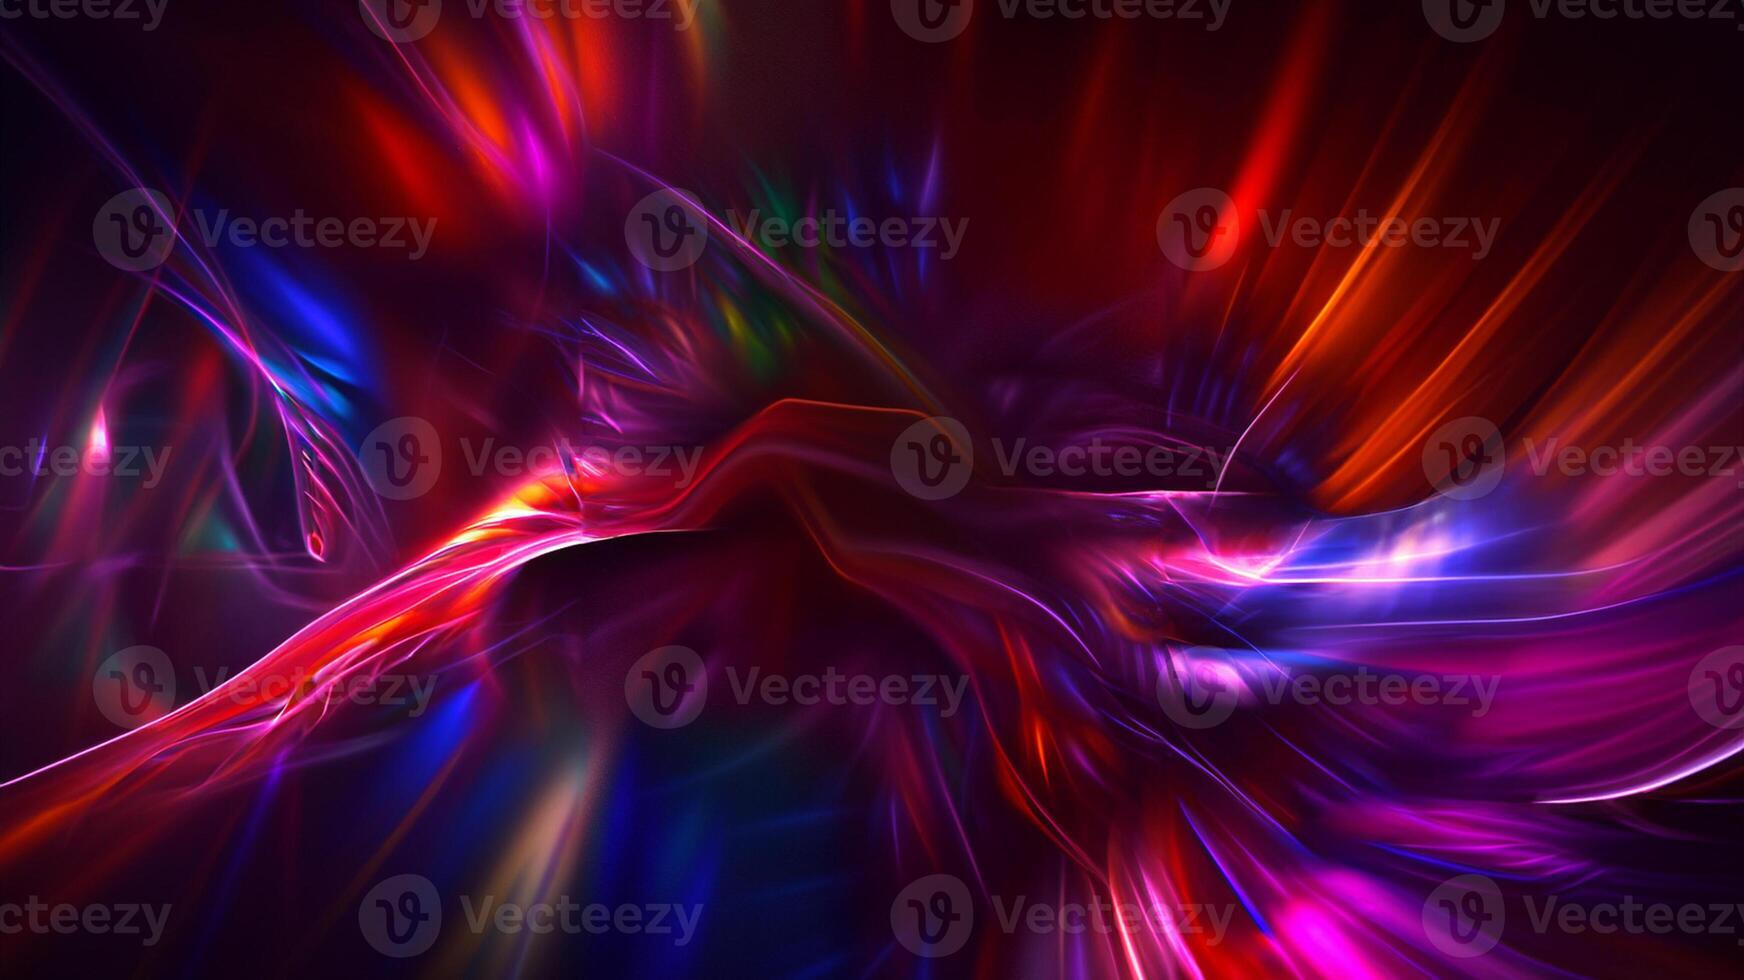 Vibrant 3D Fractal Light, Abstract Color Explosion. photo